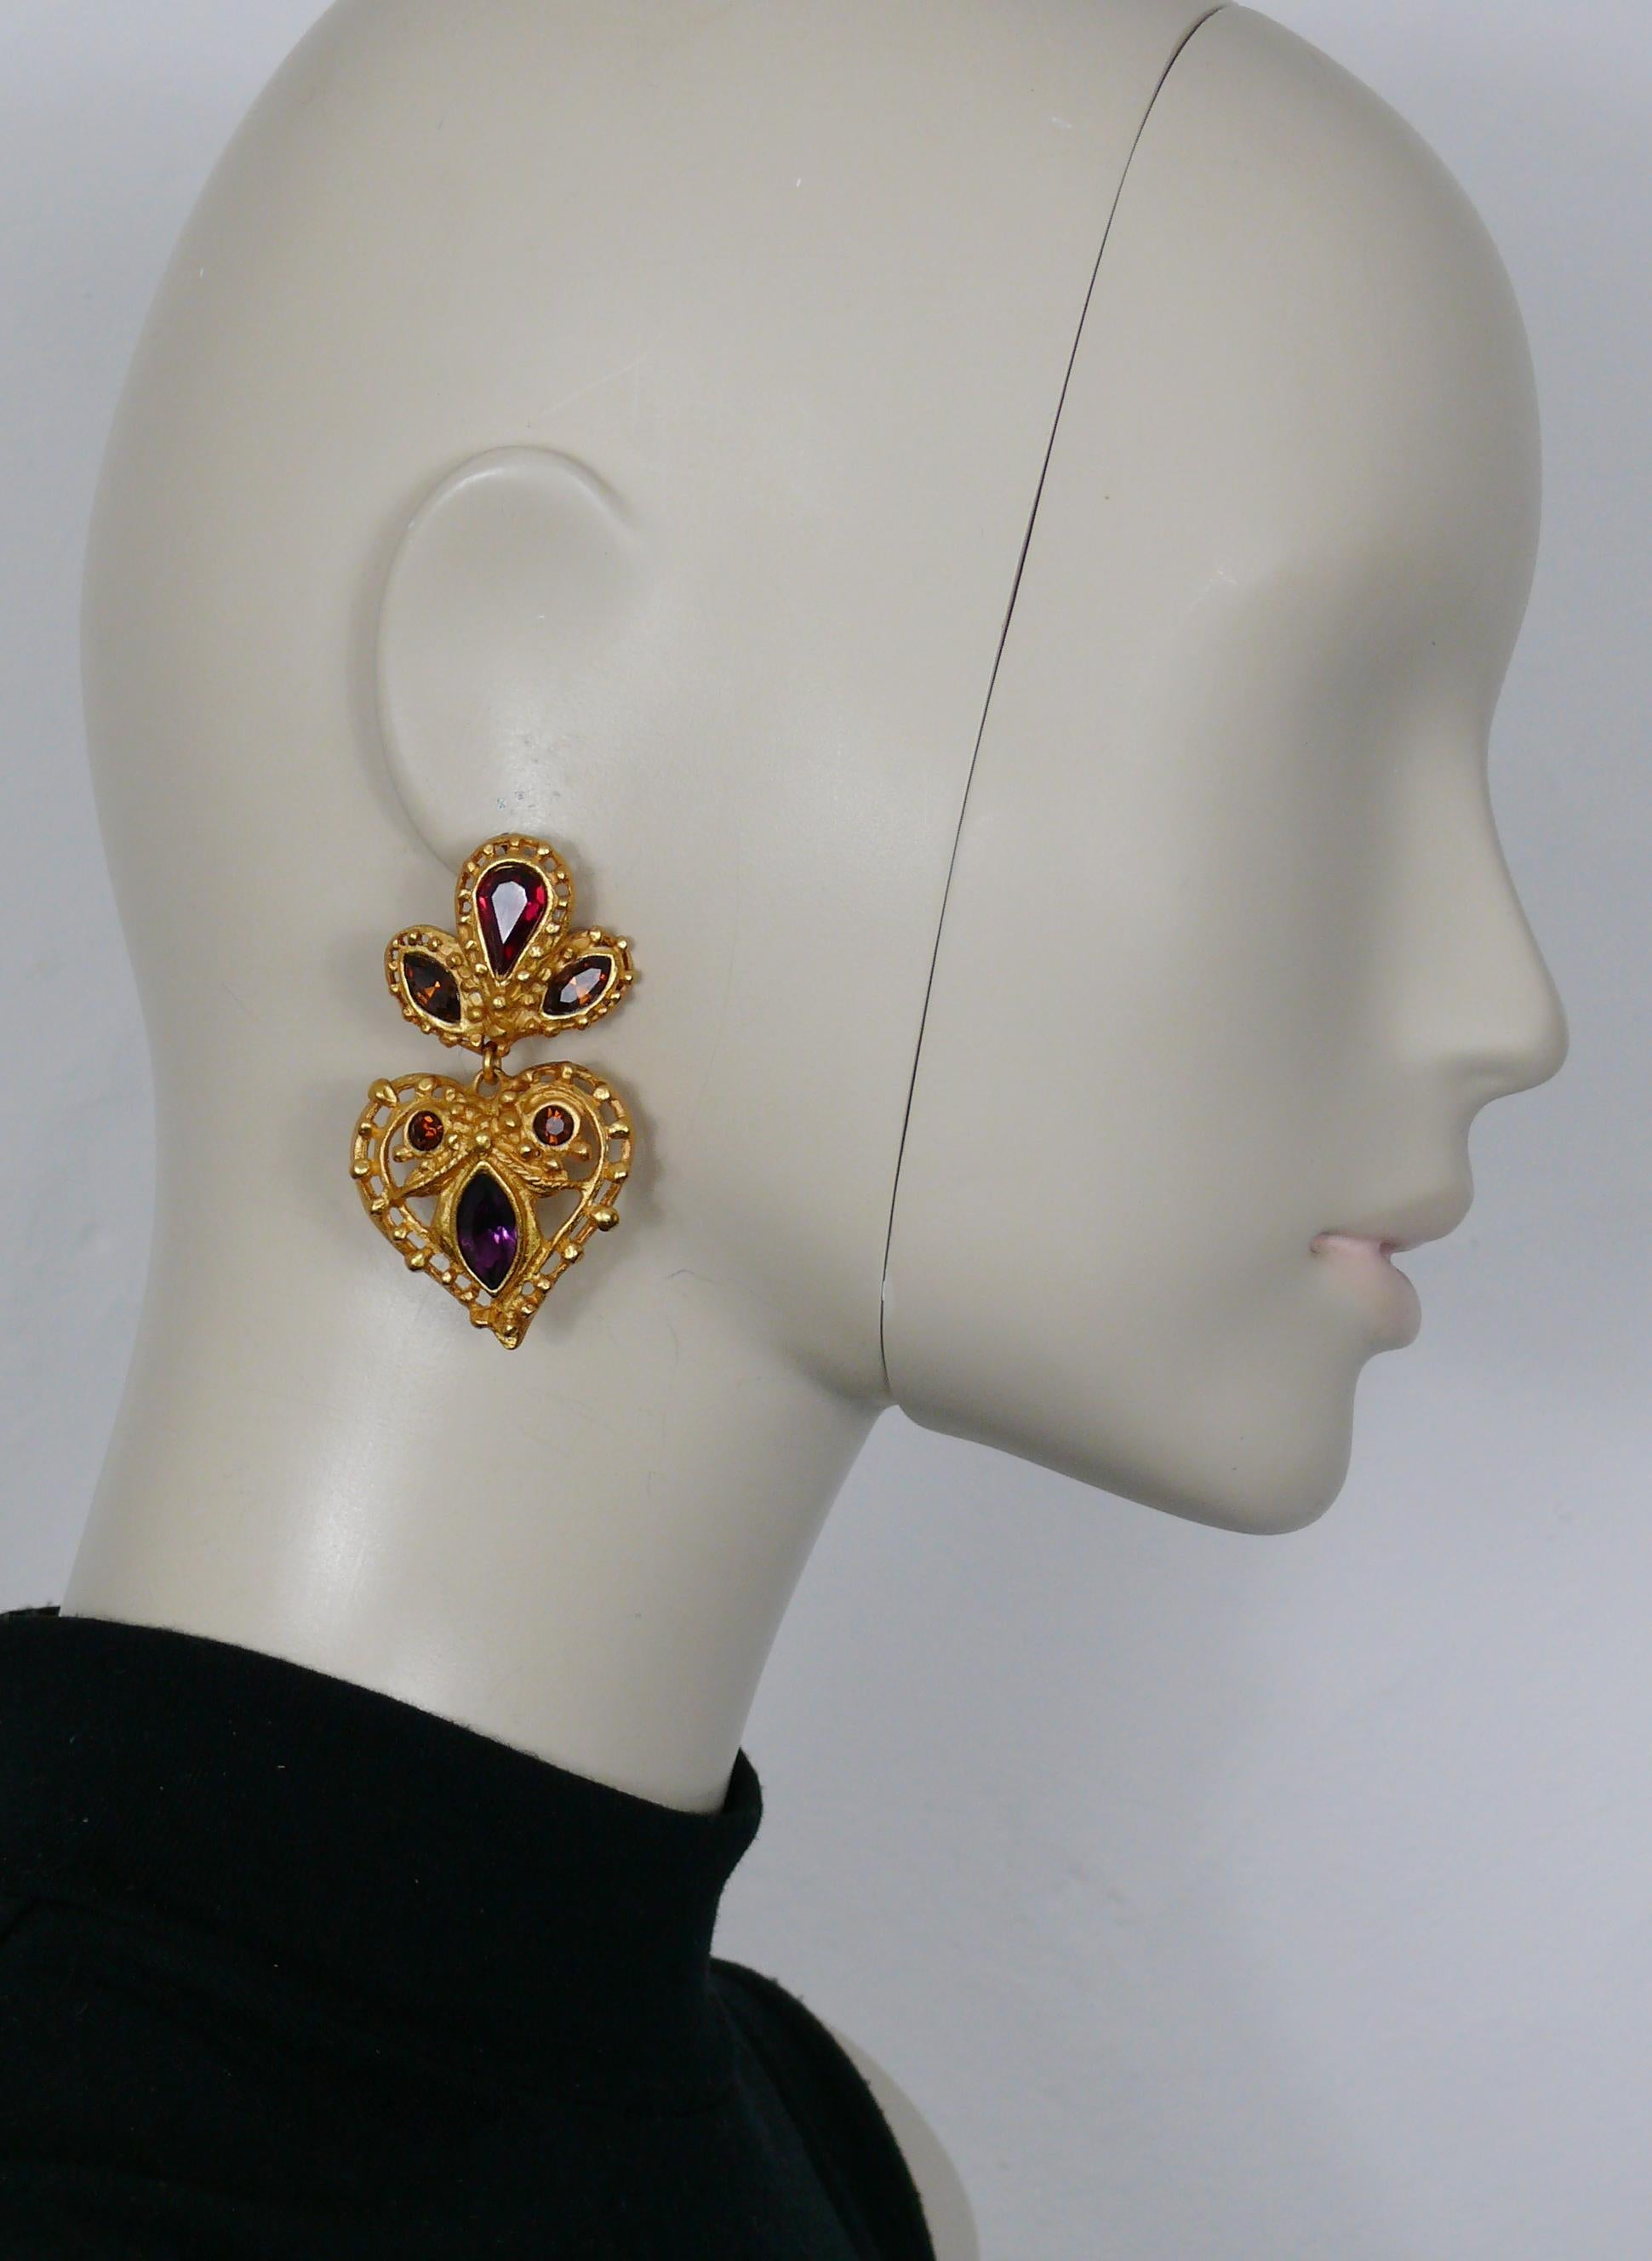 CHRISTIAN LACROIX vintage gold tone heart dangling earrings (clip-on) embellished with multicoloured crystals.

Embossed CHRISTIAN LACROIX CL Made in France.

Indicative measurements : max. height approx. 6.3 cm (2.48 inches) / max. width approx.